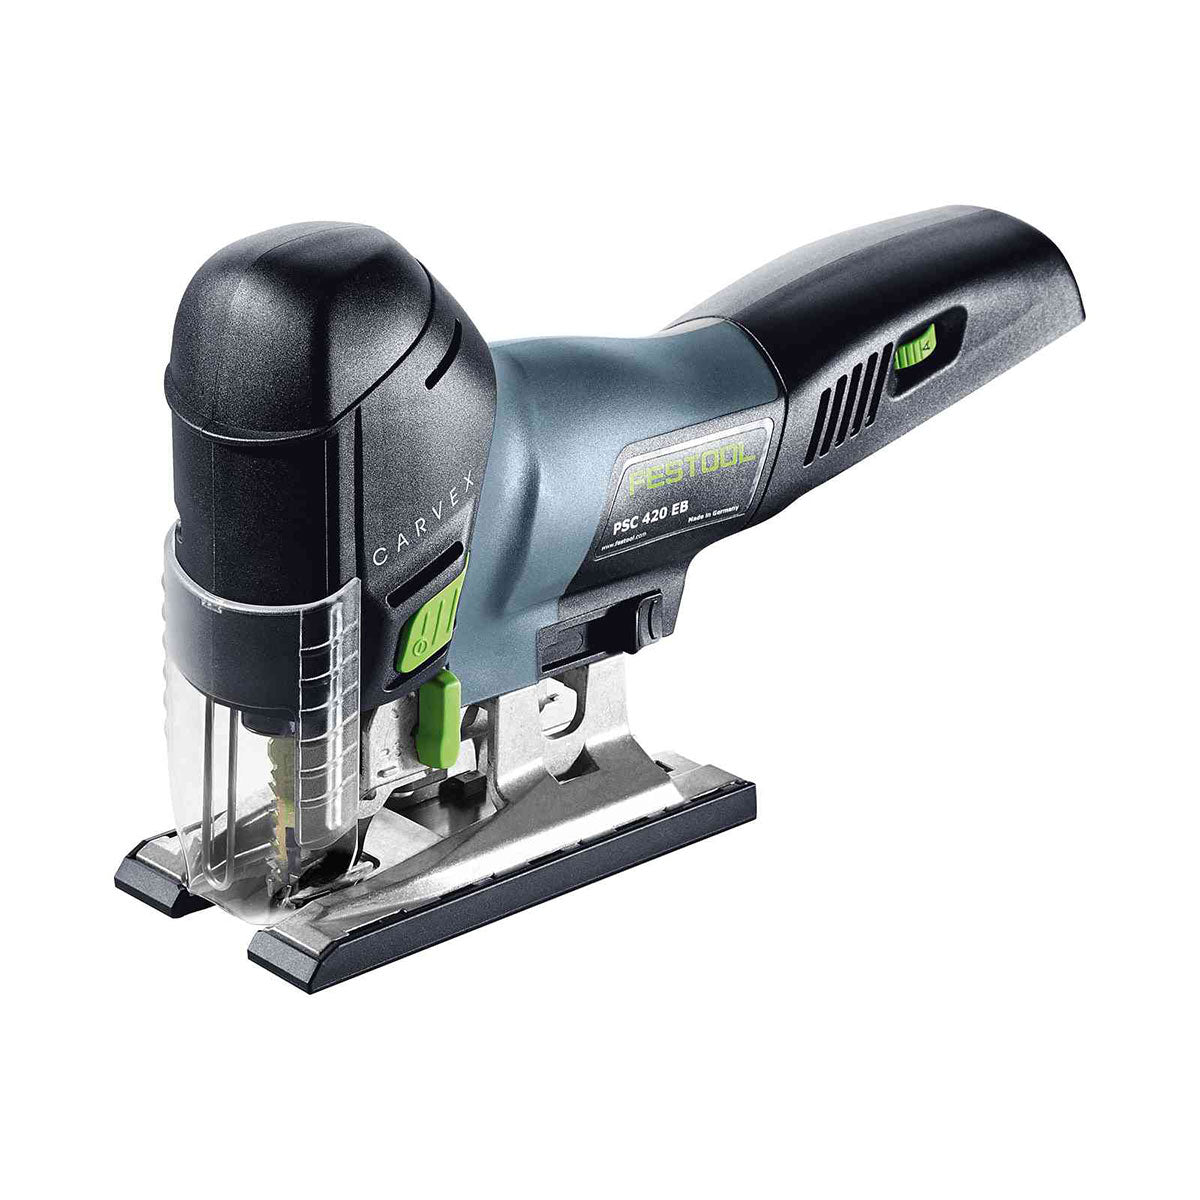 Festool 18V Brushless Plunge Saw & Jigsaw With 2 x 5.0Ah Battery, Rapid Charger 578027